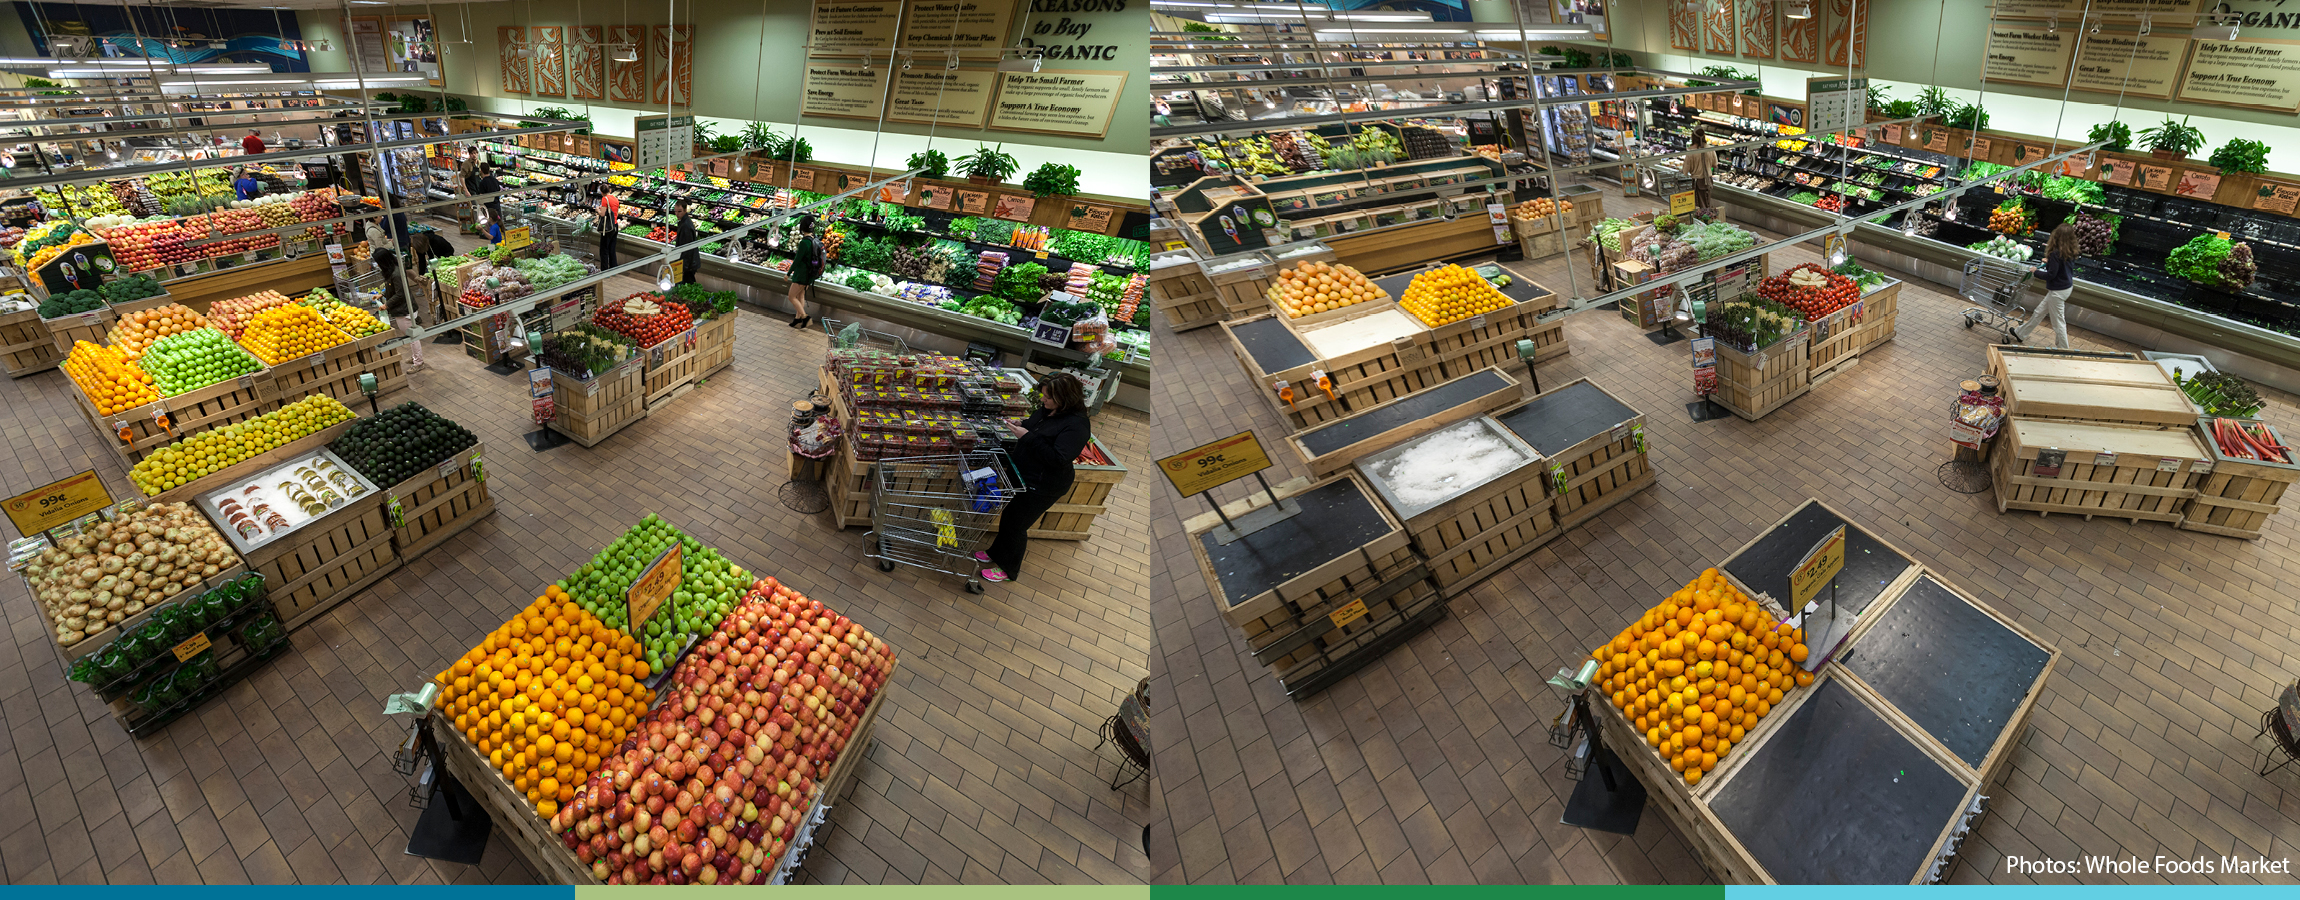 A pair of photos showing the produce section of a grocery store. In the left hand photo, the shelves are piled high with produce: red apples, green apples, orange oranges, yellow lemons, red tomatoes, and more. In the right hand photo, many of the shelves are bare.